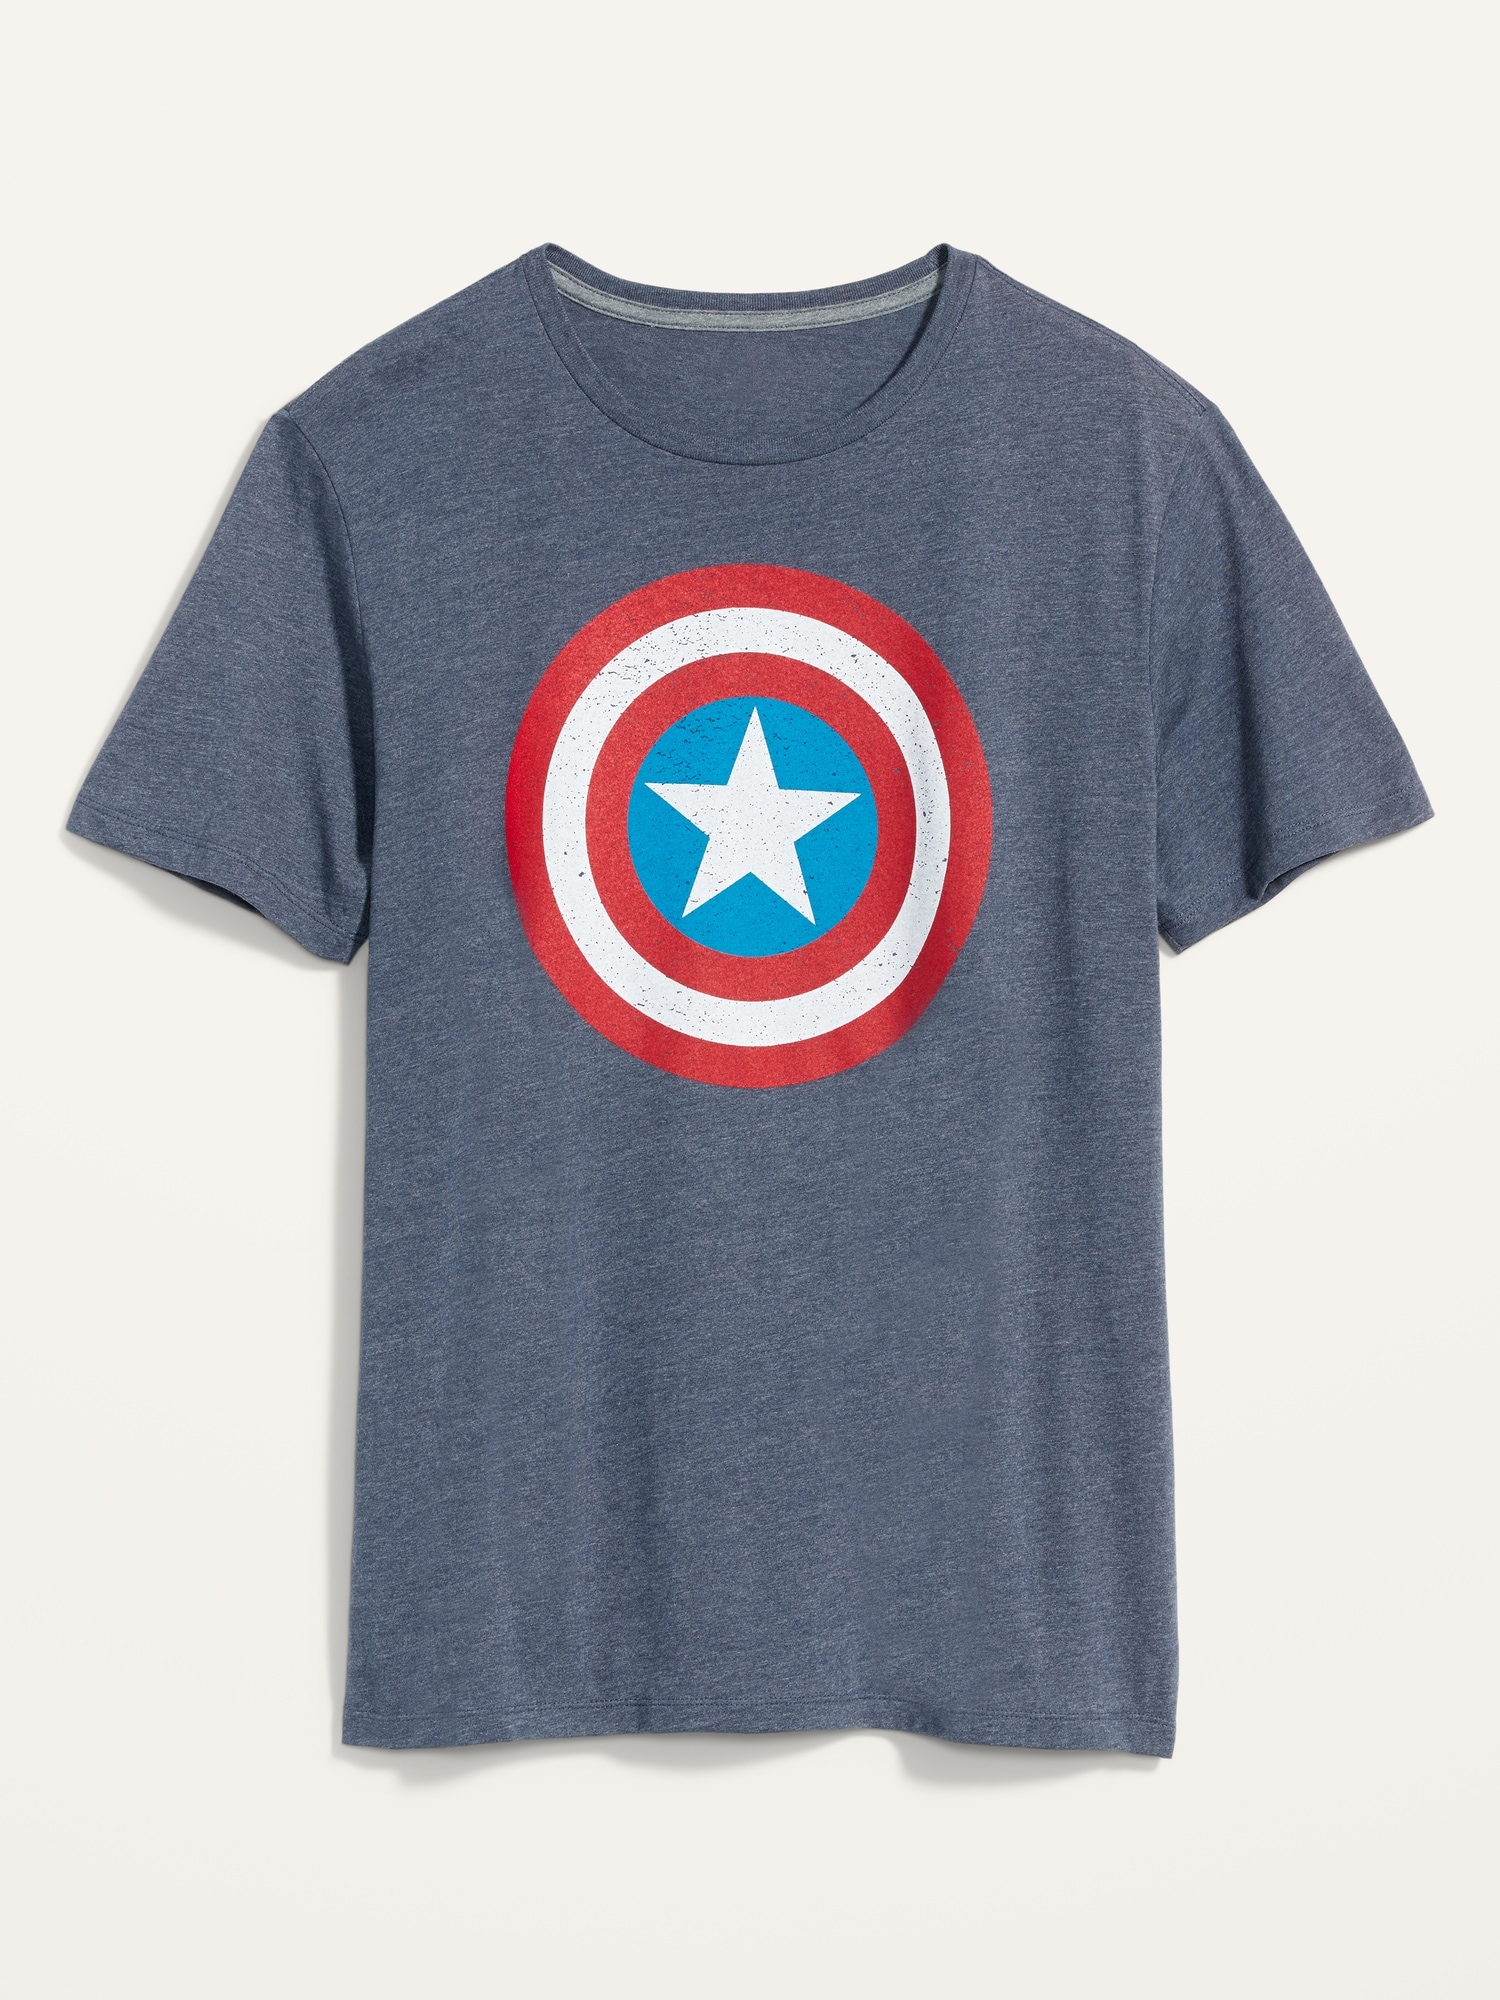 Old Navy Marvel Captain America Graphic gender-neutral T-Shirt for Adults - - Tall Size XL